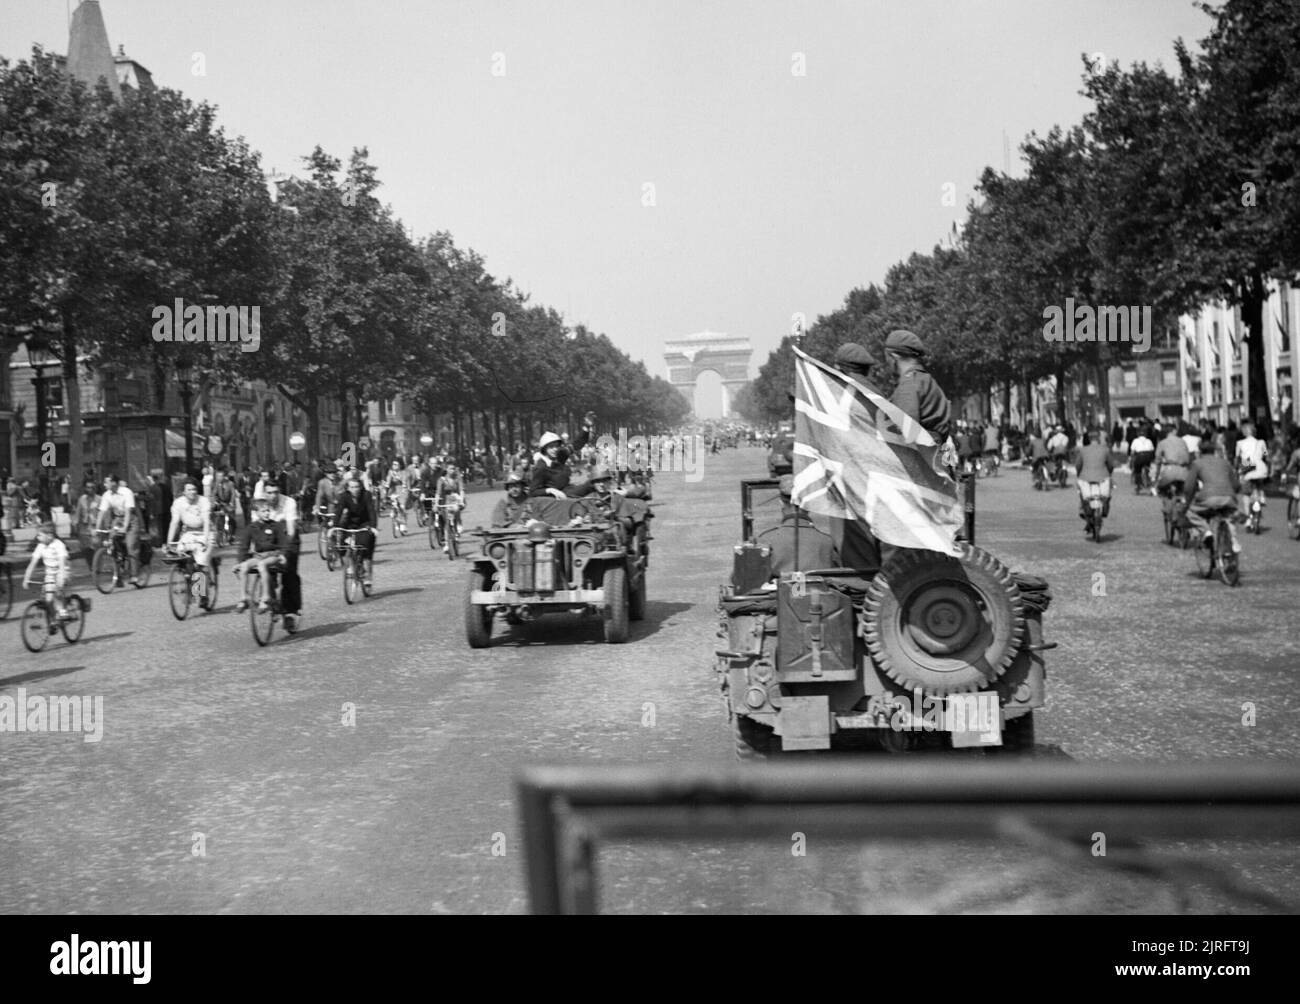 An AFPU (Army Film and Photographic Unit) jeep displaying a large union flag drives down the Champs Elysees in Paris, 26 August 1944. An AFPU jeep displaying a large union flag drives down the Champs Elysees in Paris, 26 August 1944. Stock Photo